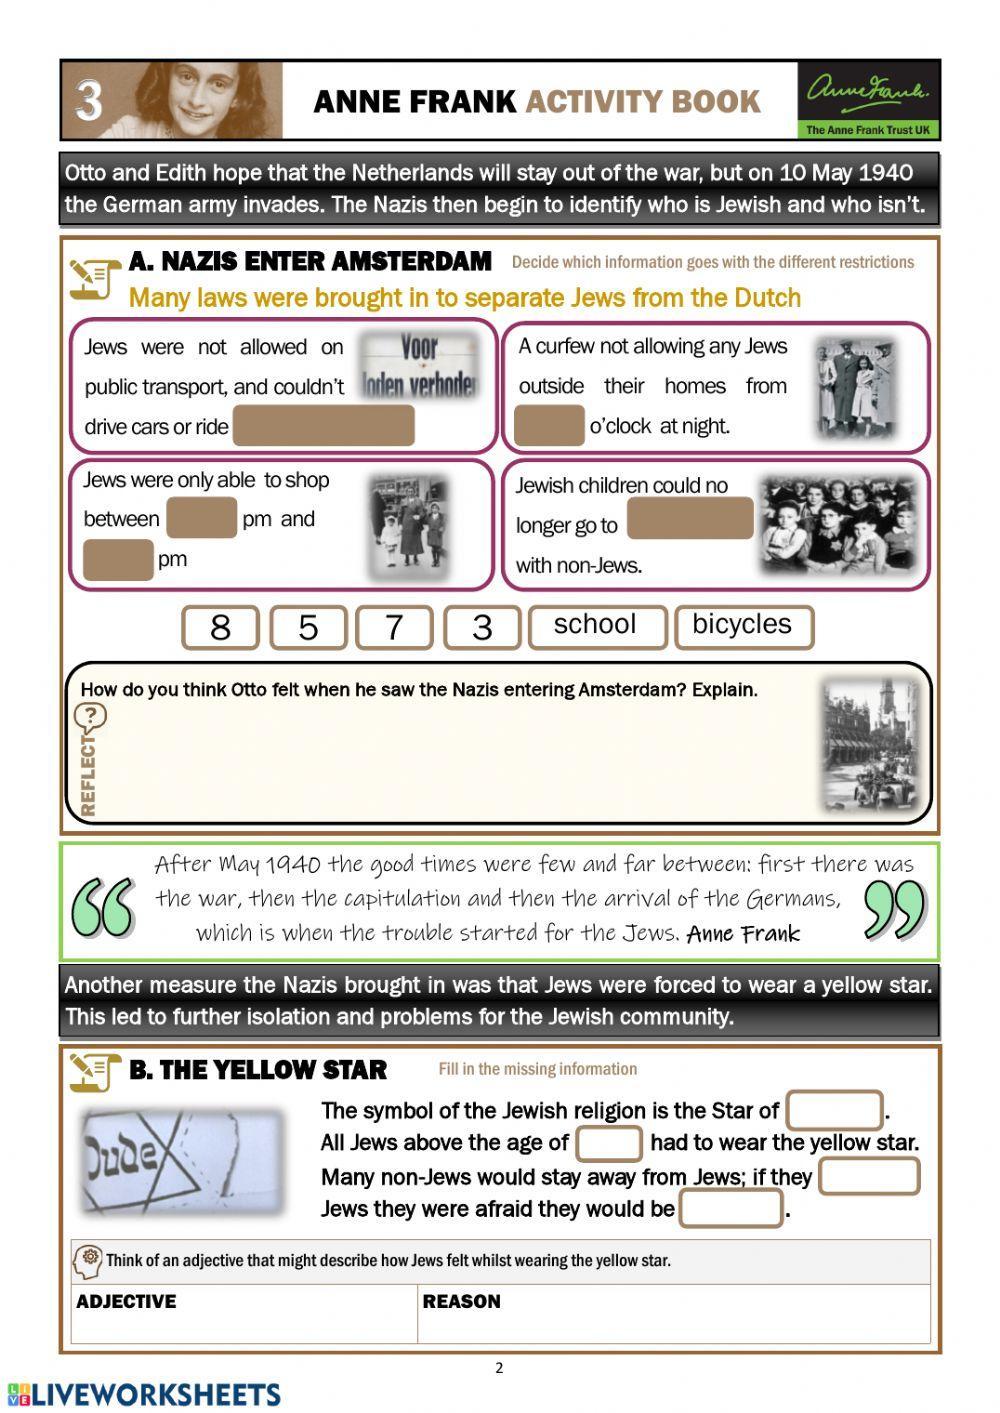 Anne Frank - Activity Book Section 3